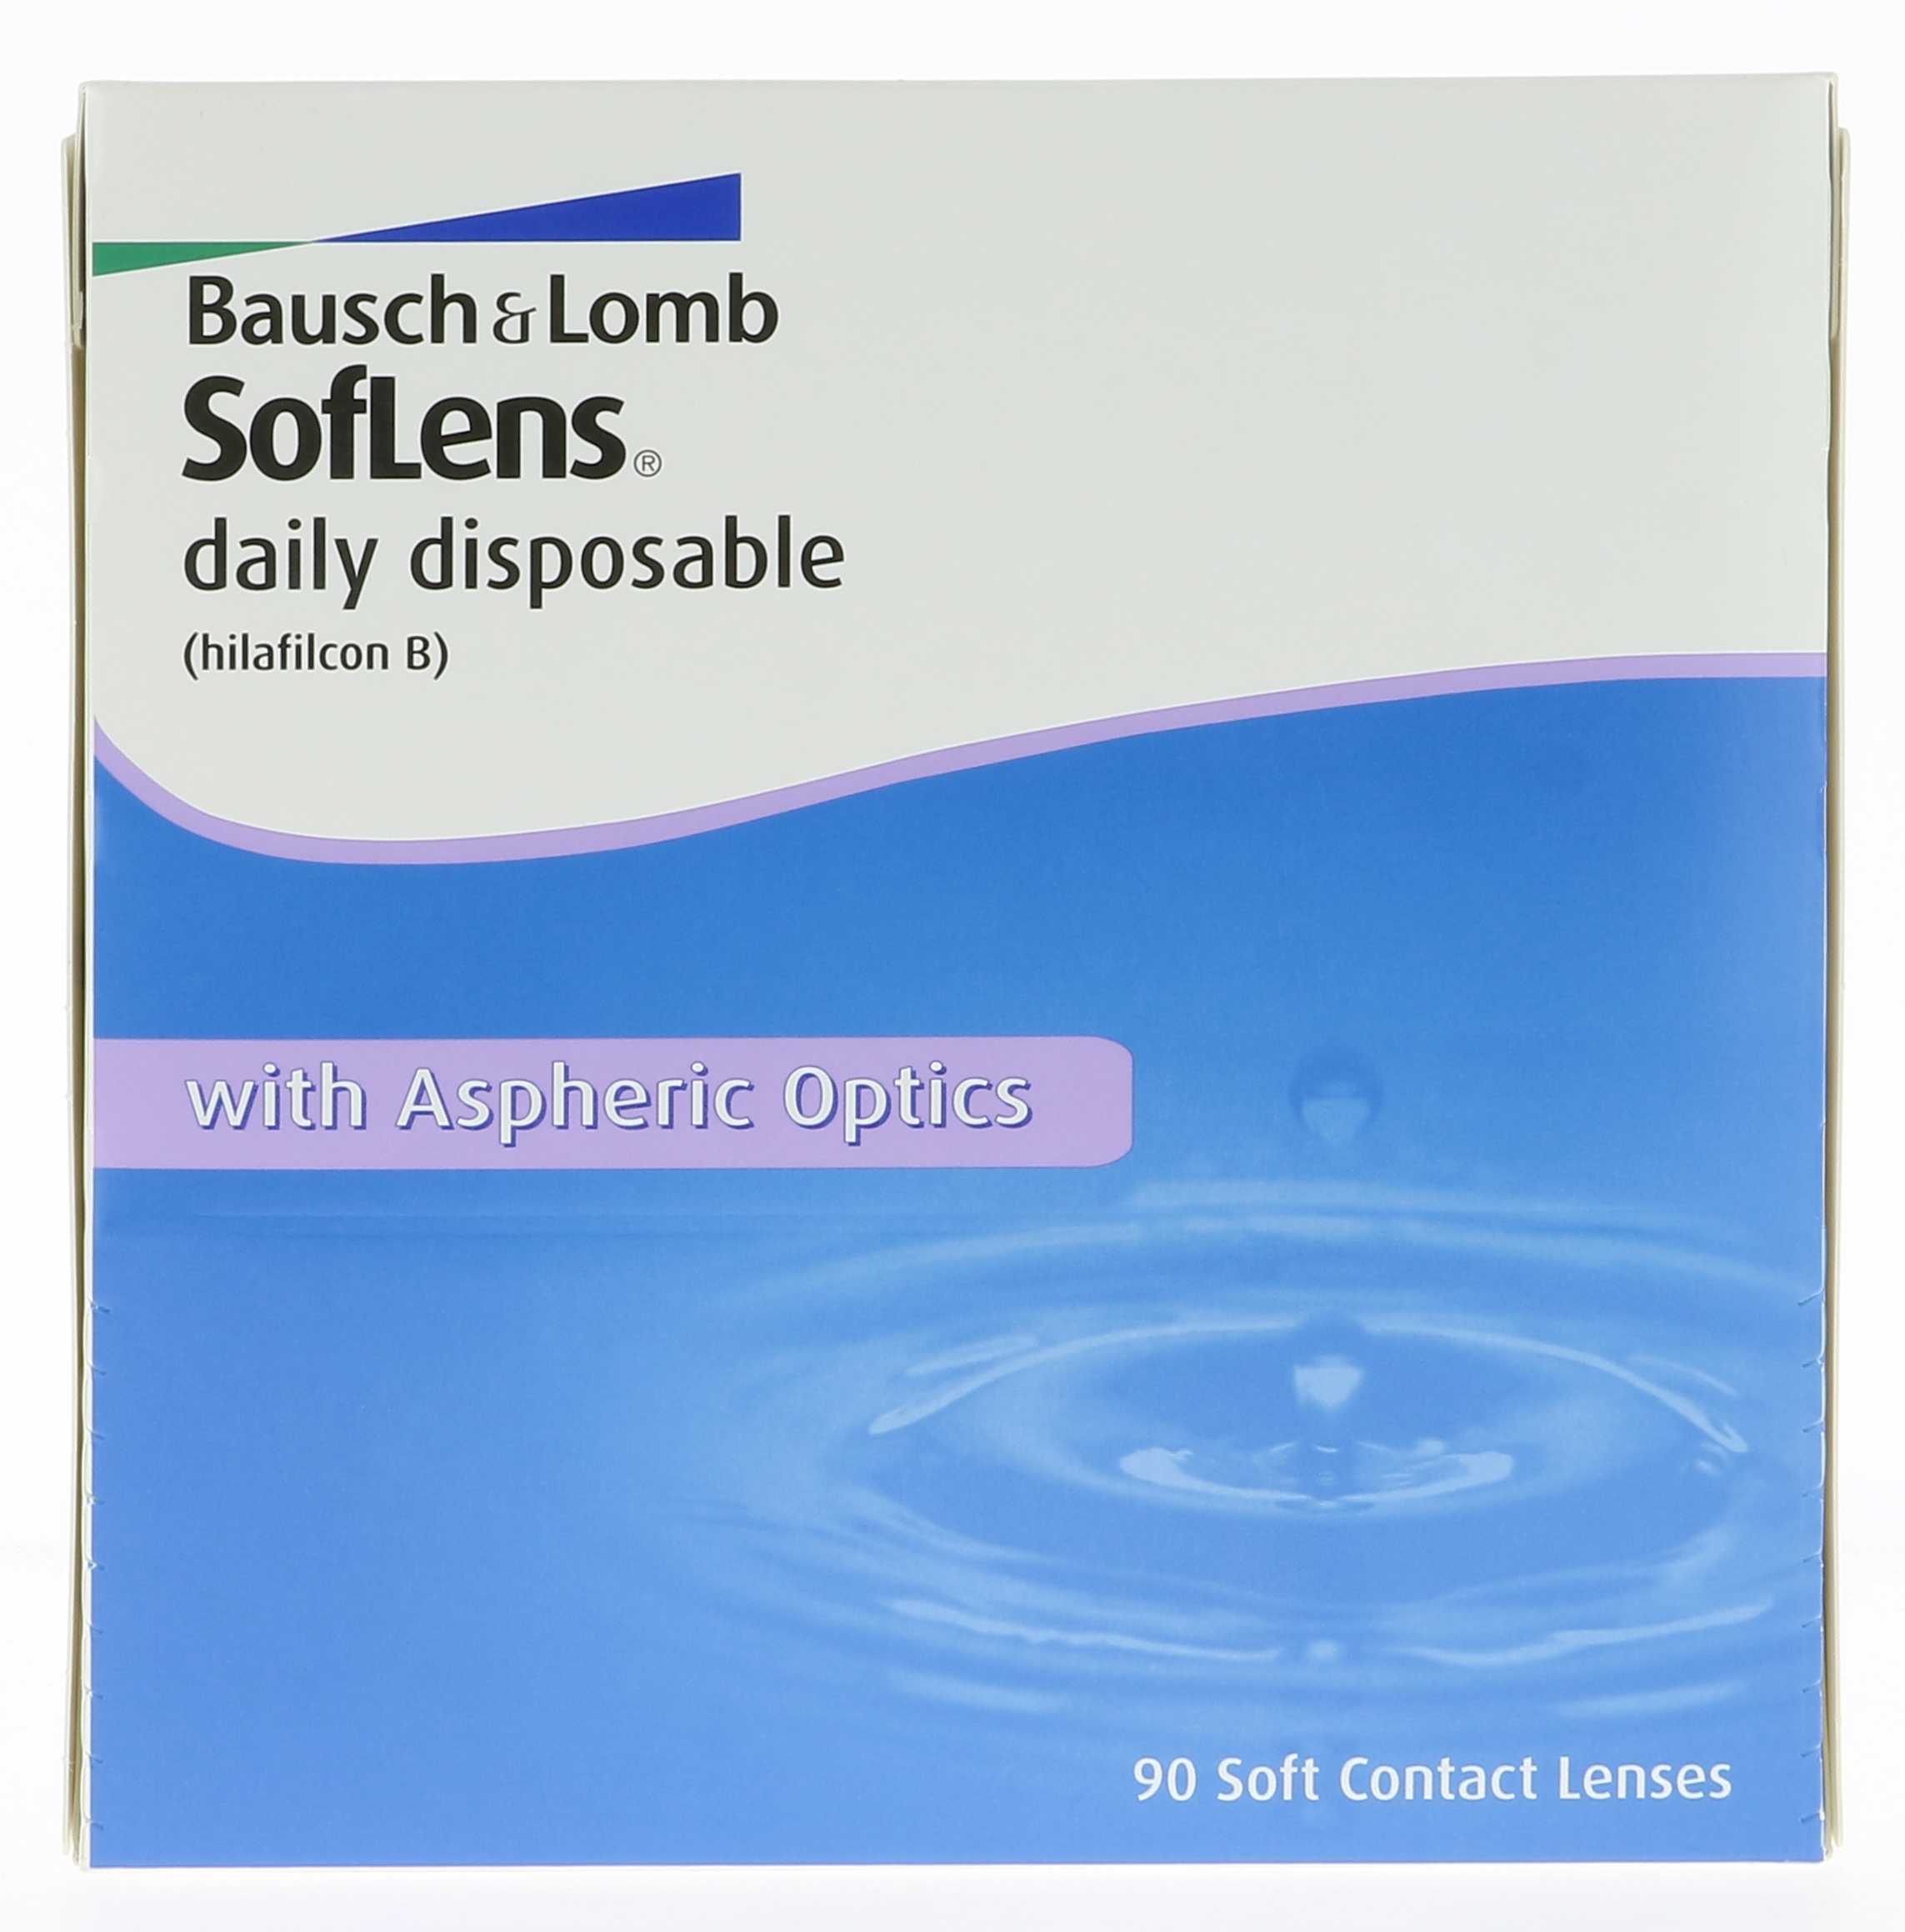  SOFLENS DAILY DISPOSABLE 90 BAUSCH & LOMB